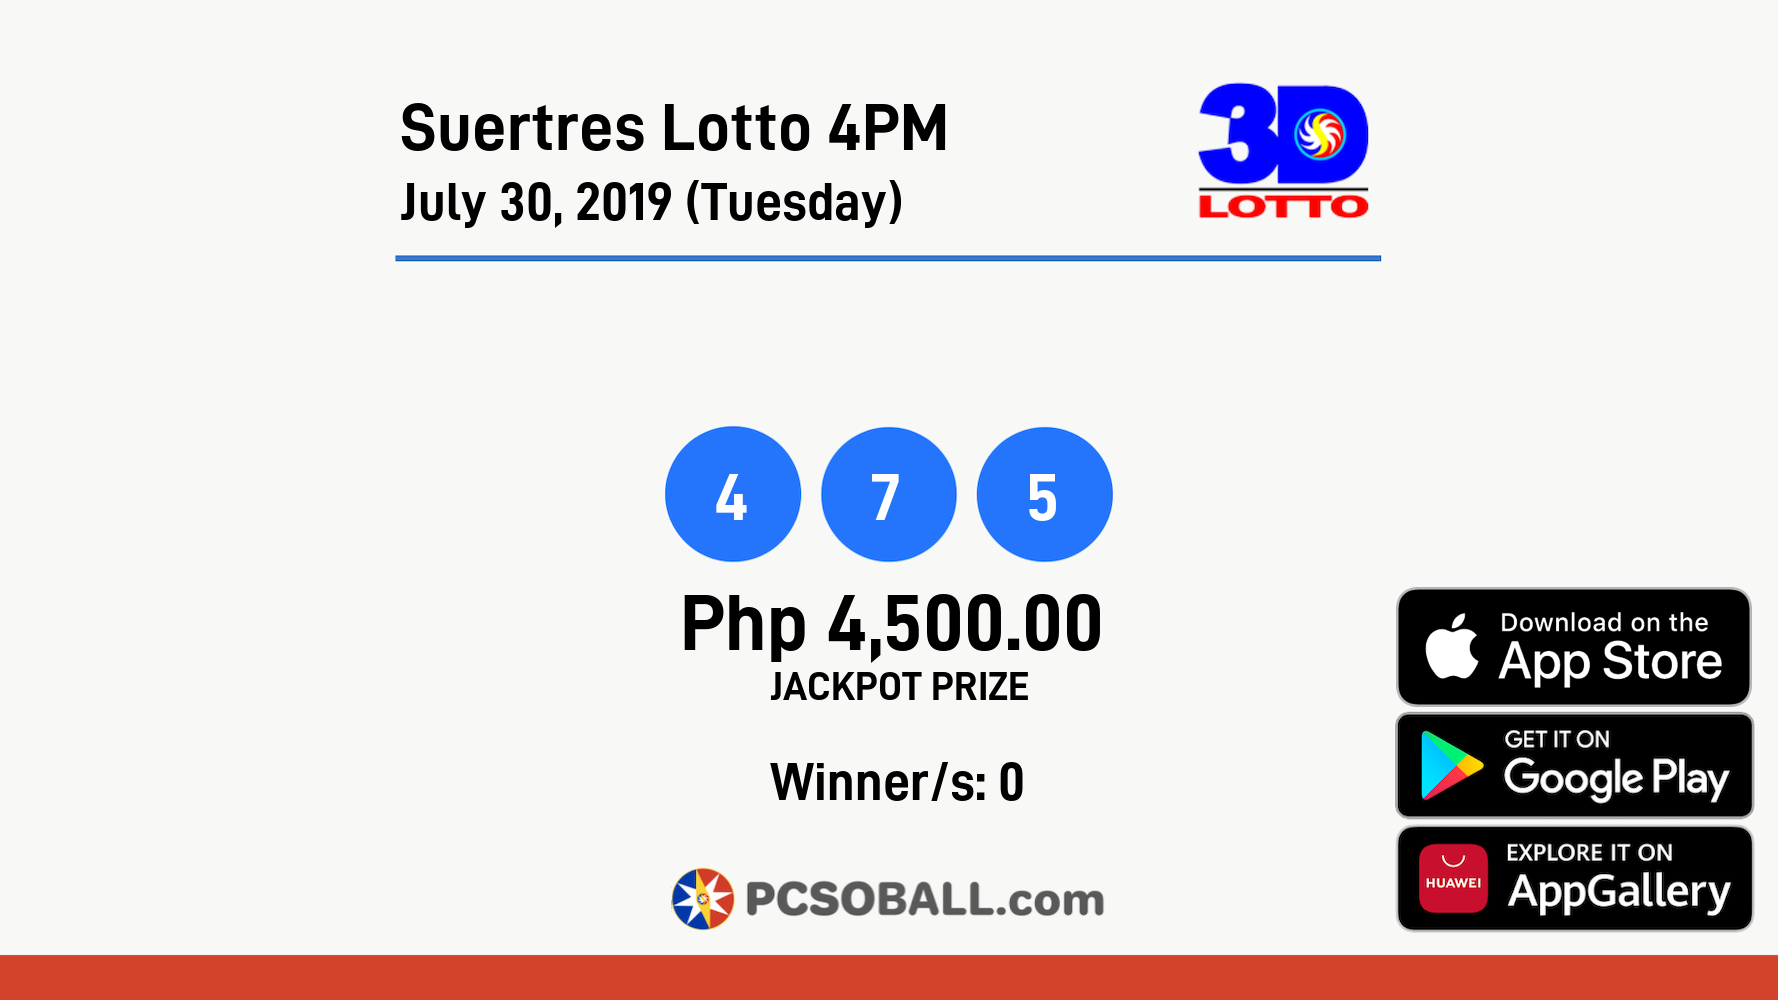 Suertres Lotto 4PM July 30, 2019 (Tuesday) Result